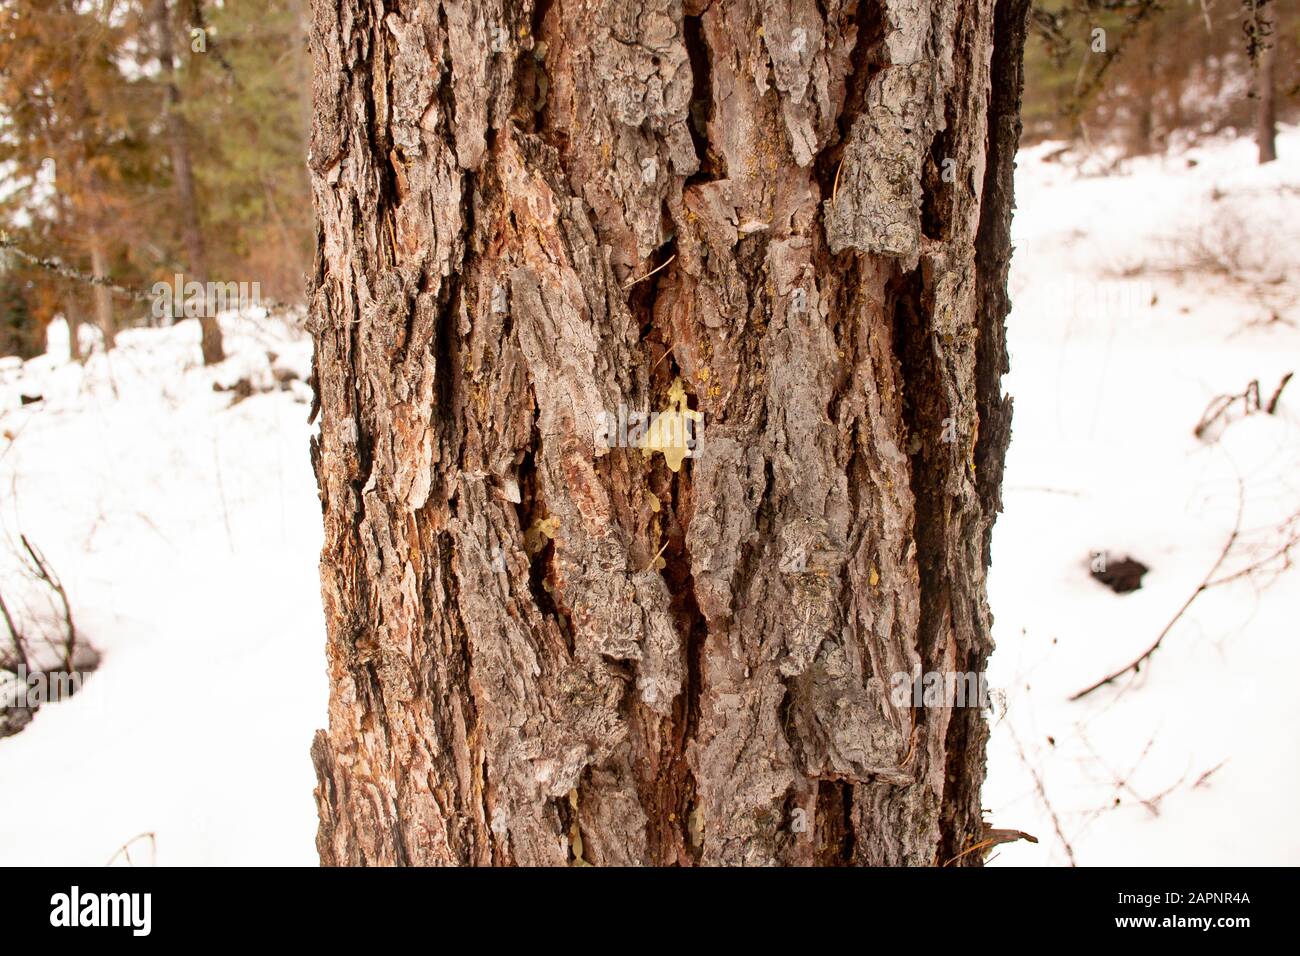 The trunk and bark of a Western Larch, (Larix occidentalis). The spots of tree sap may indicate the onset of beetle damage. Winter. Troy, Montana. Oth Stock Photo